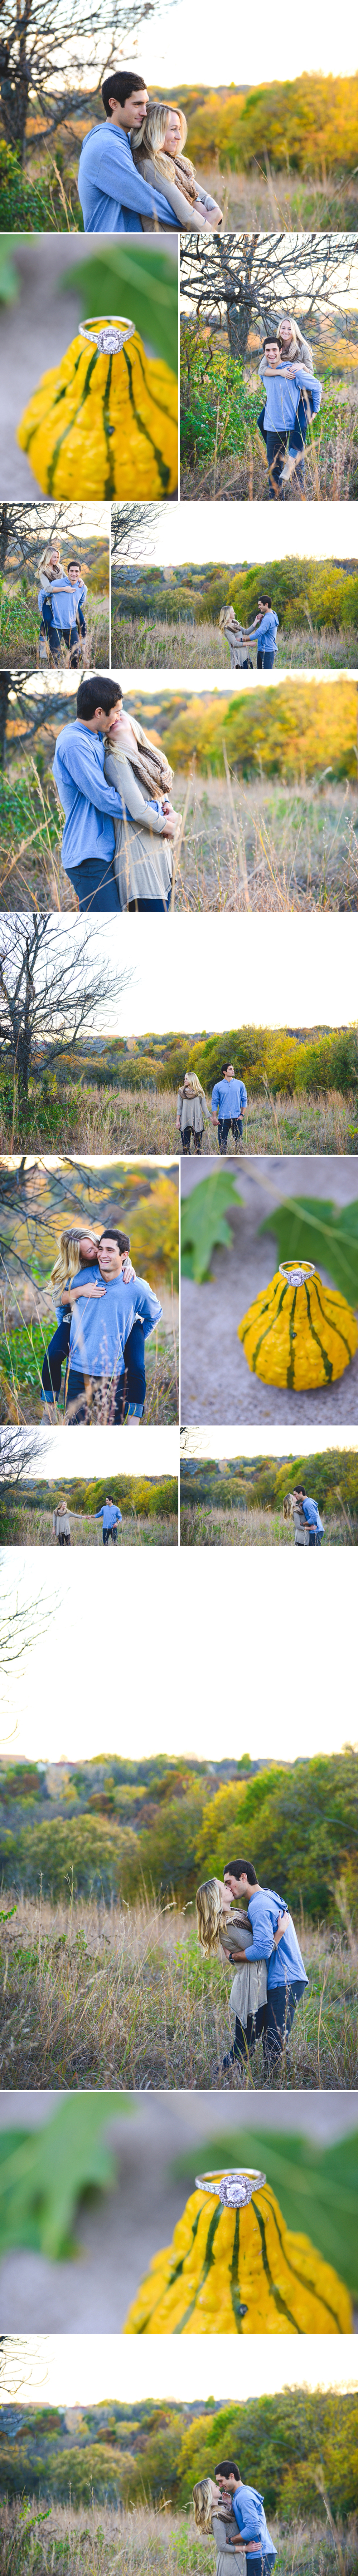 Engagement Pictures at Shawnee Mission Park_0002